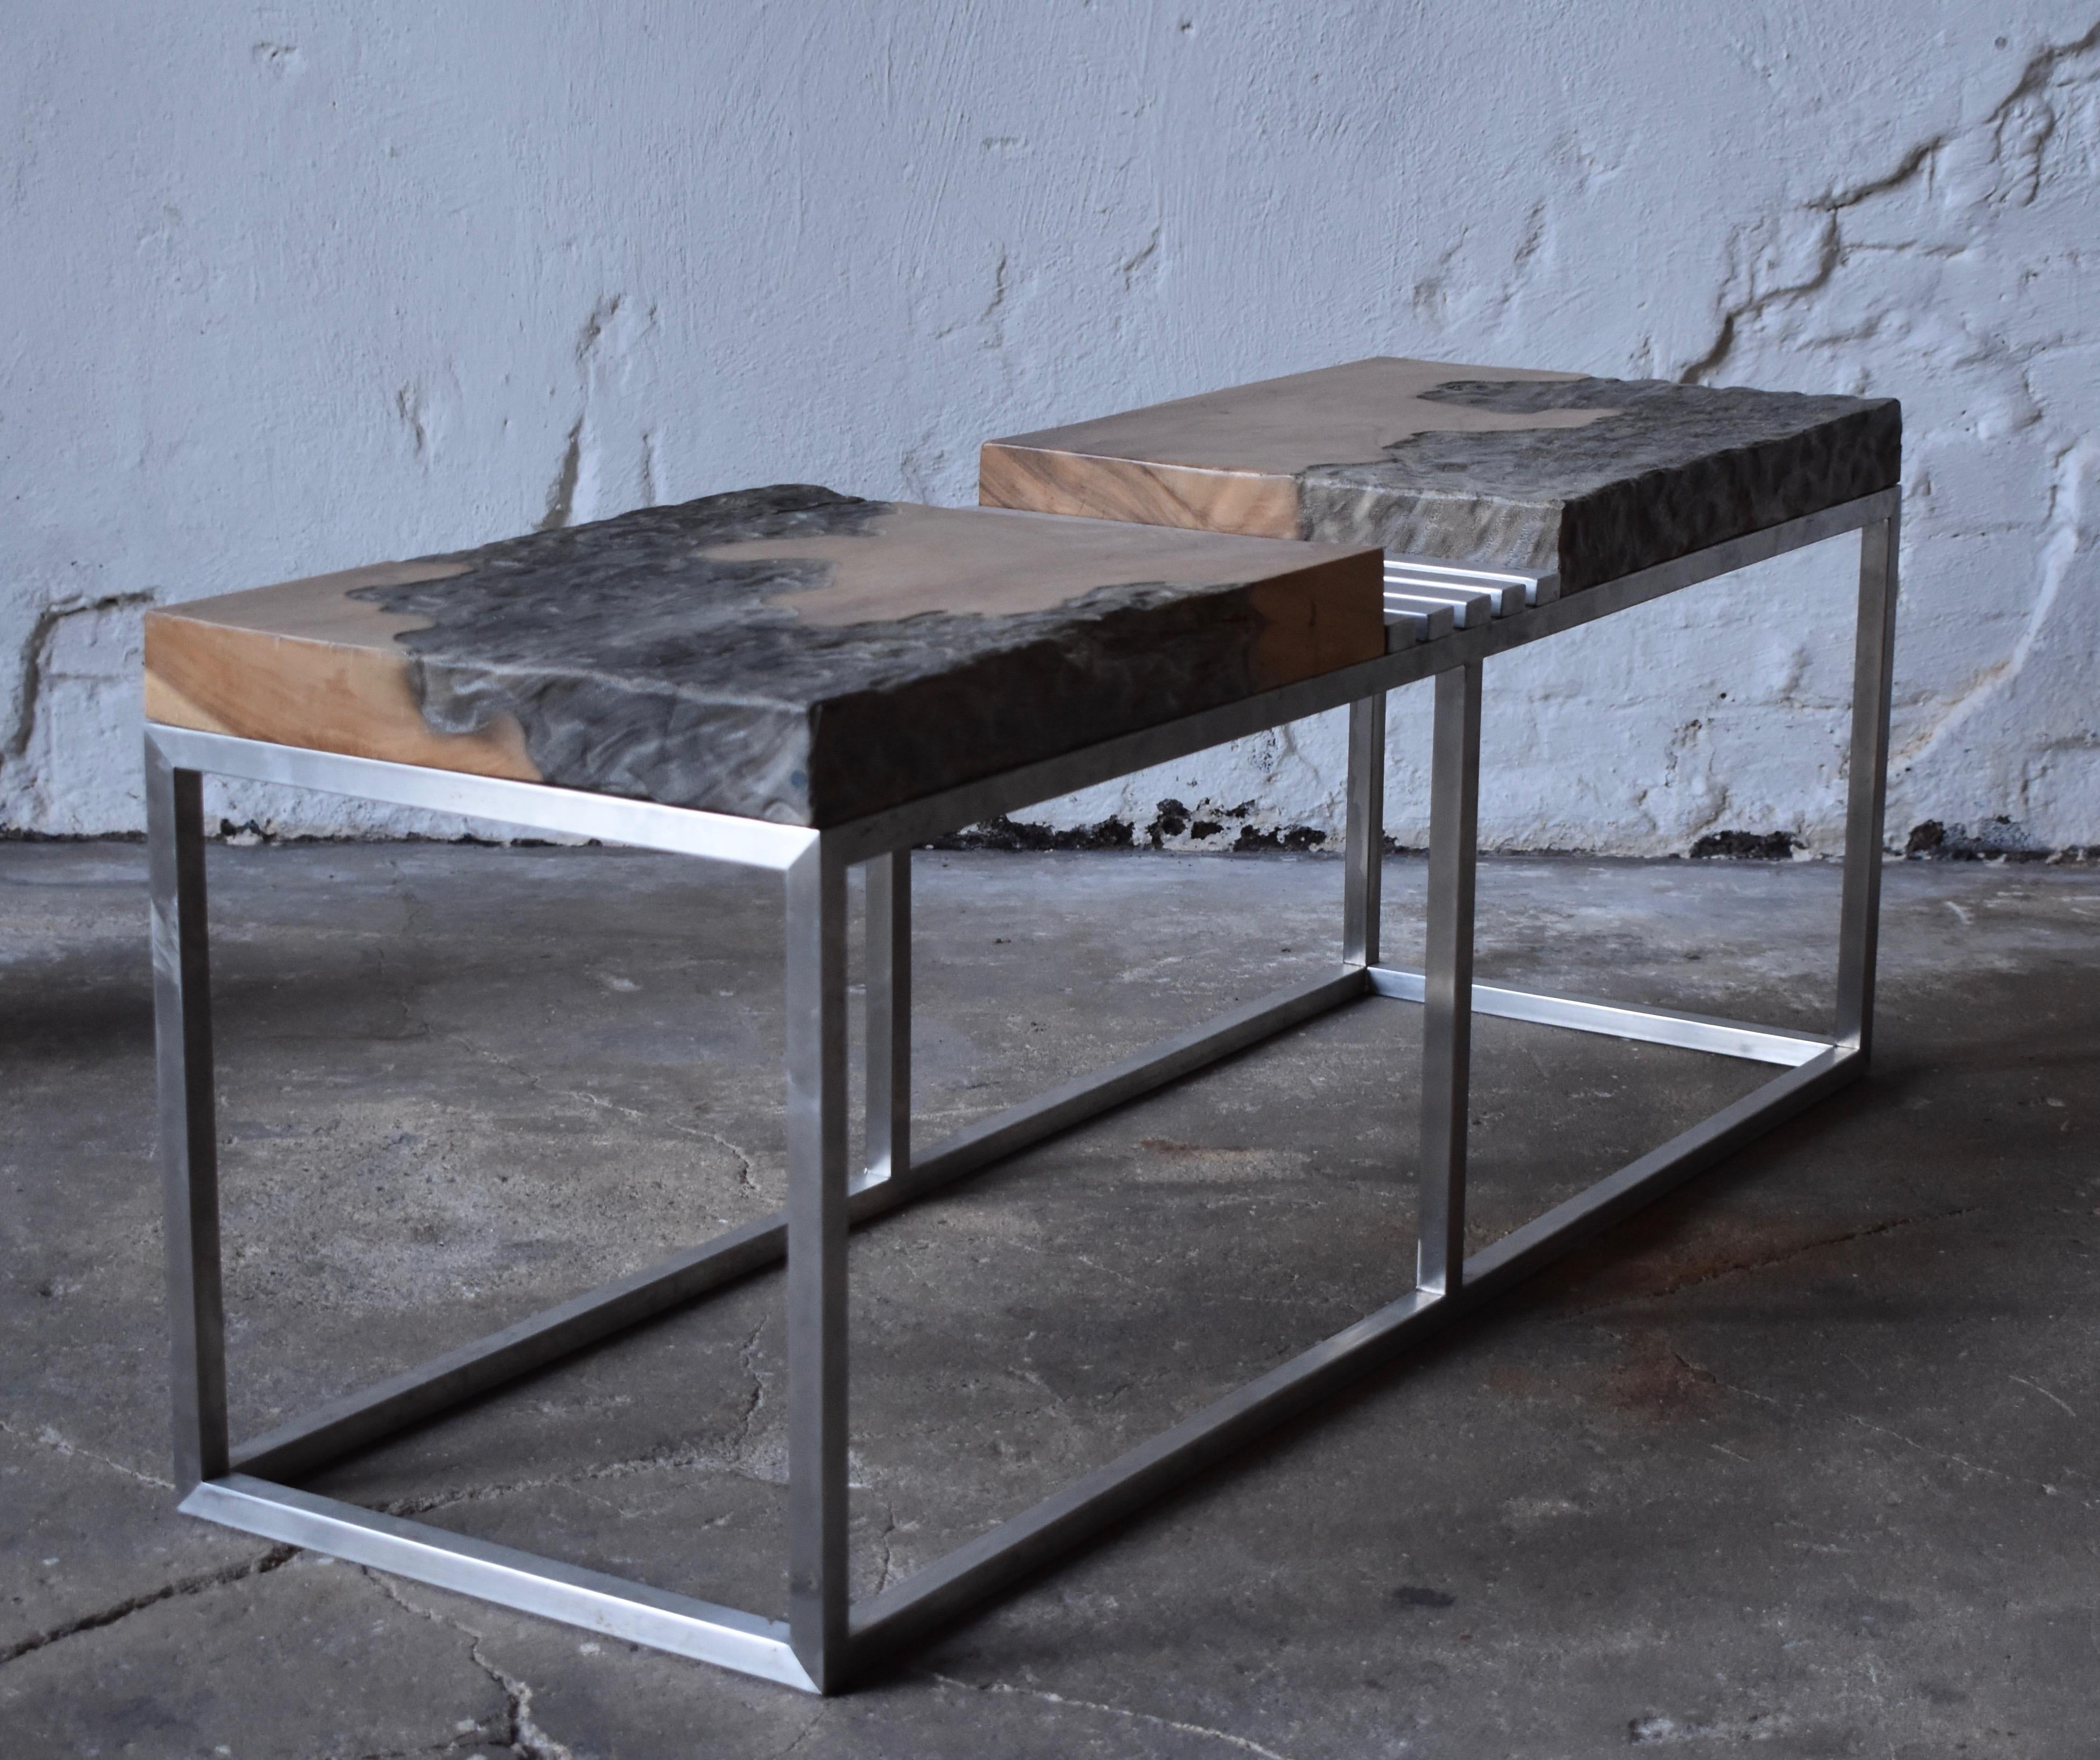 Hand-Carved Modern Style Bench in Painted Wood and Stainless Steel by R+R Sweden Design For Sale